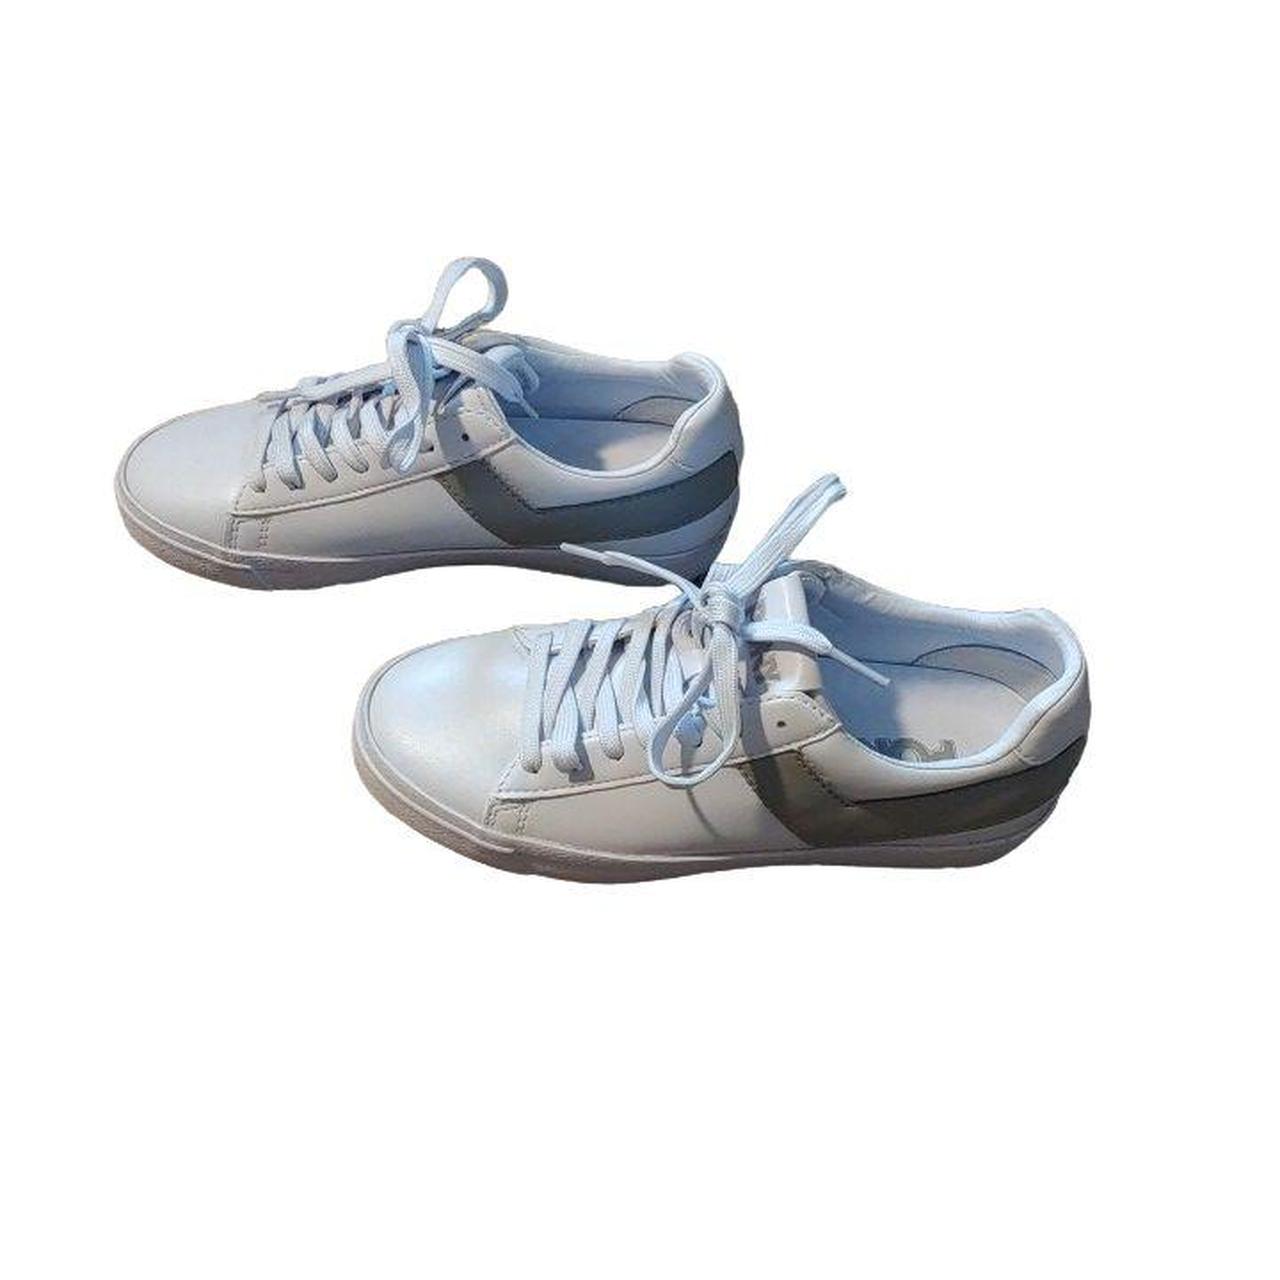 Product Image 2 - PONY sneakers size 6
Smoke free